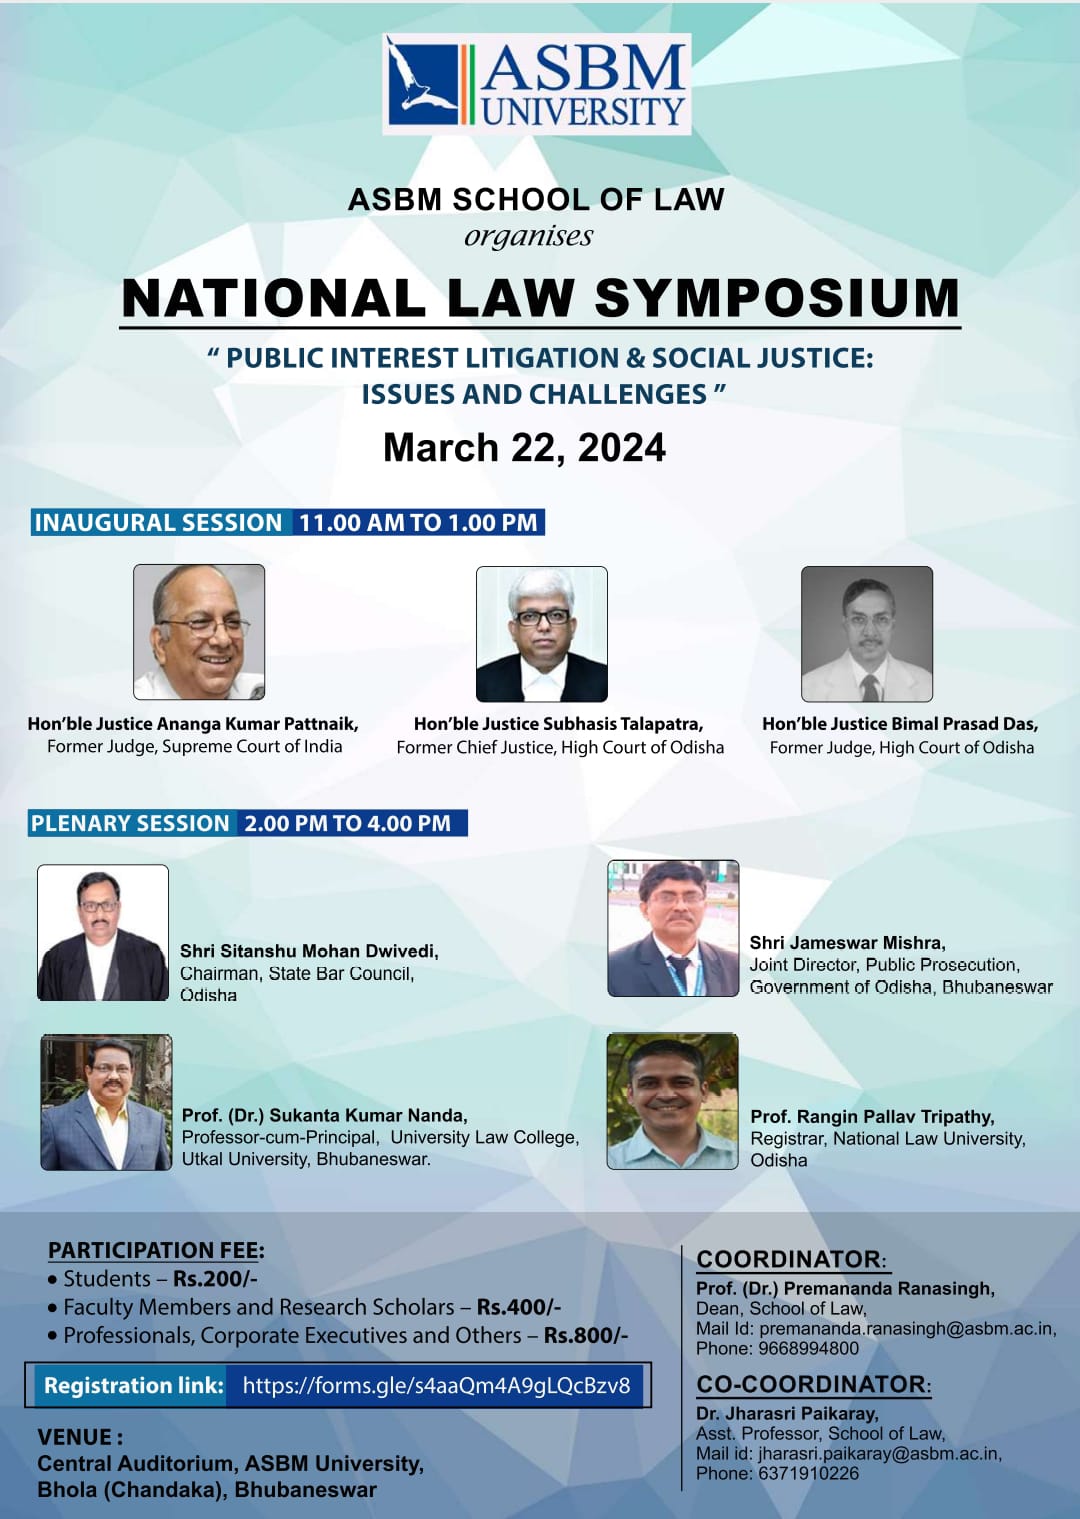 2nd National Law Symposium - Public Interest Litigation & Social Justice Issues & Challenges